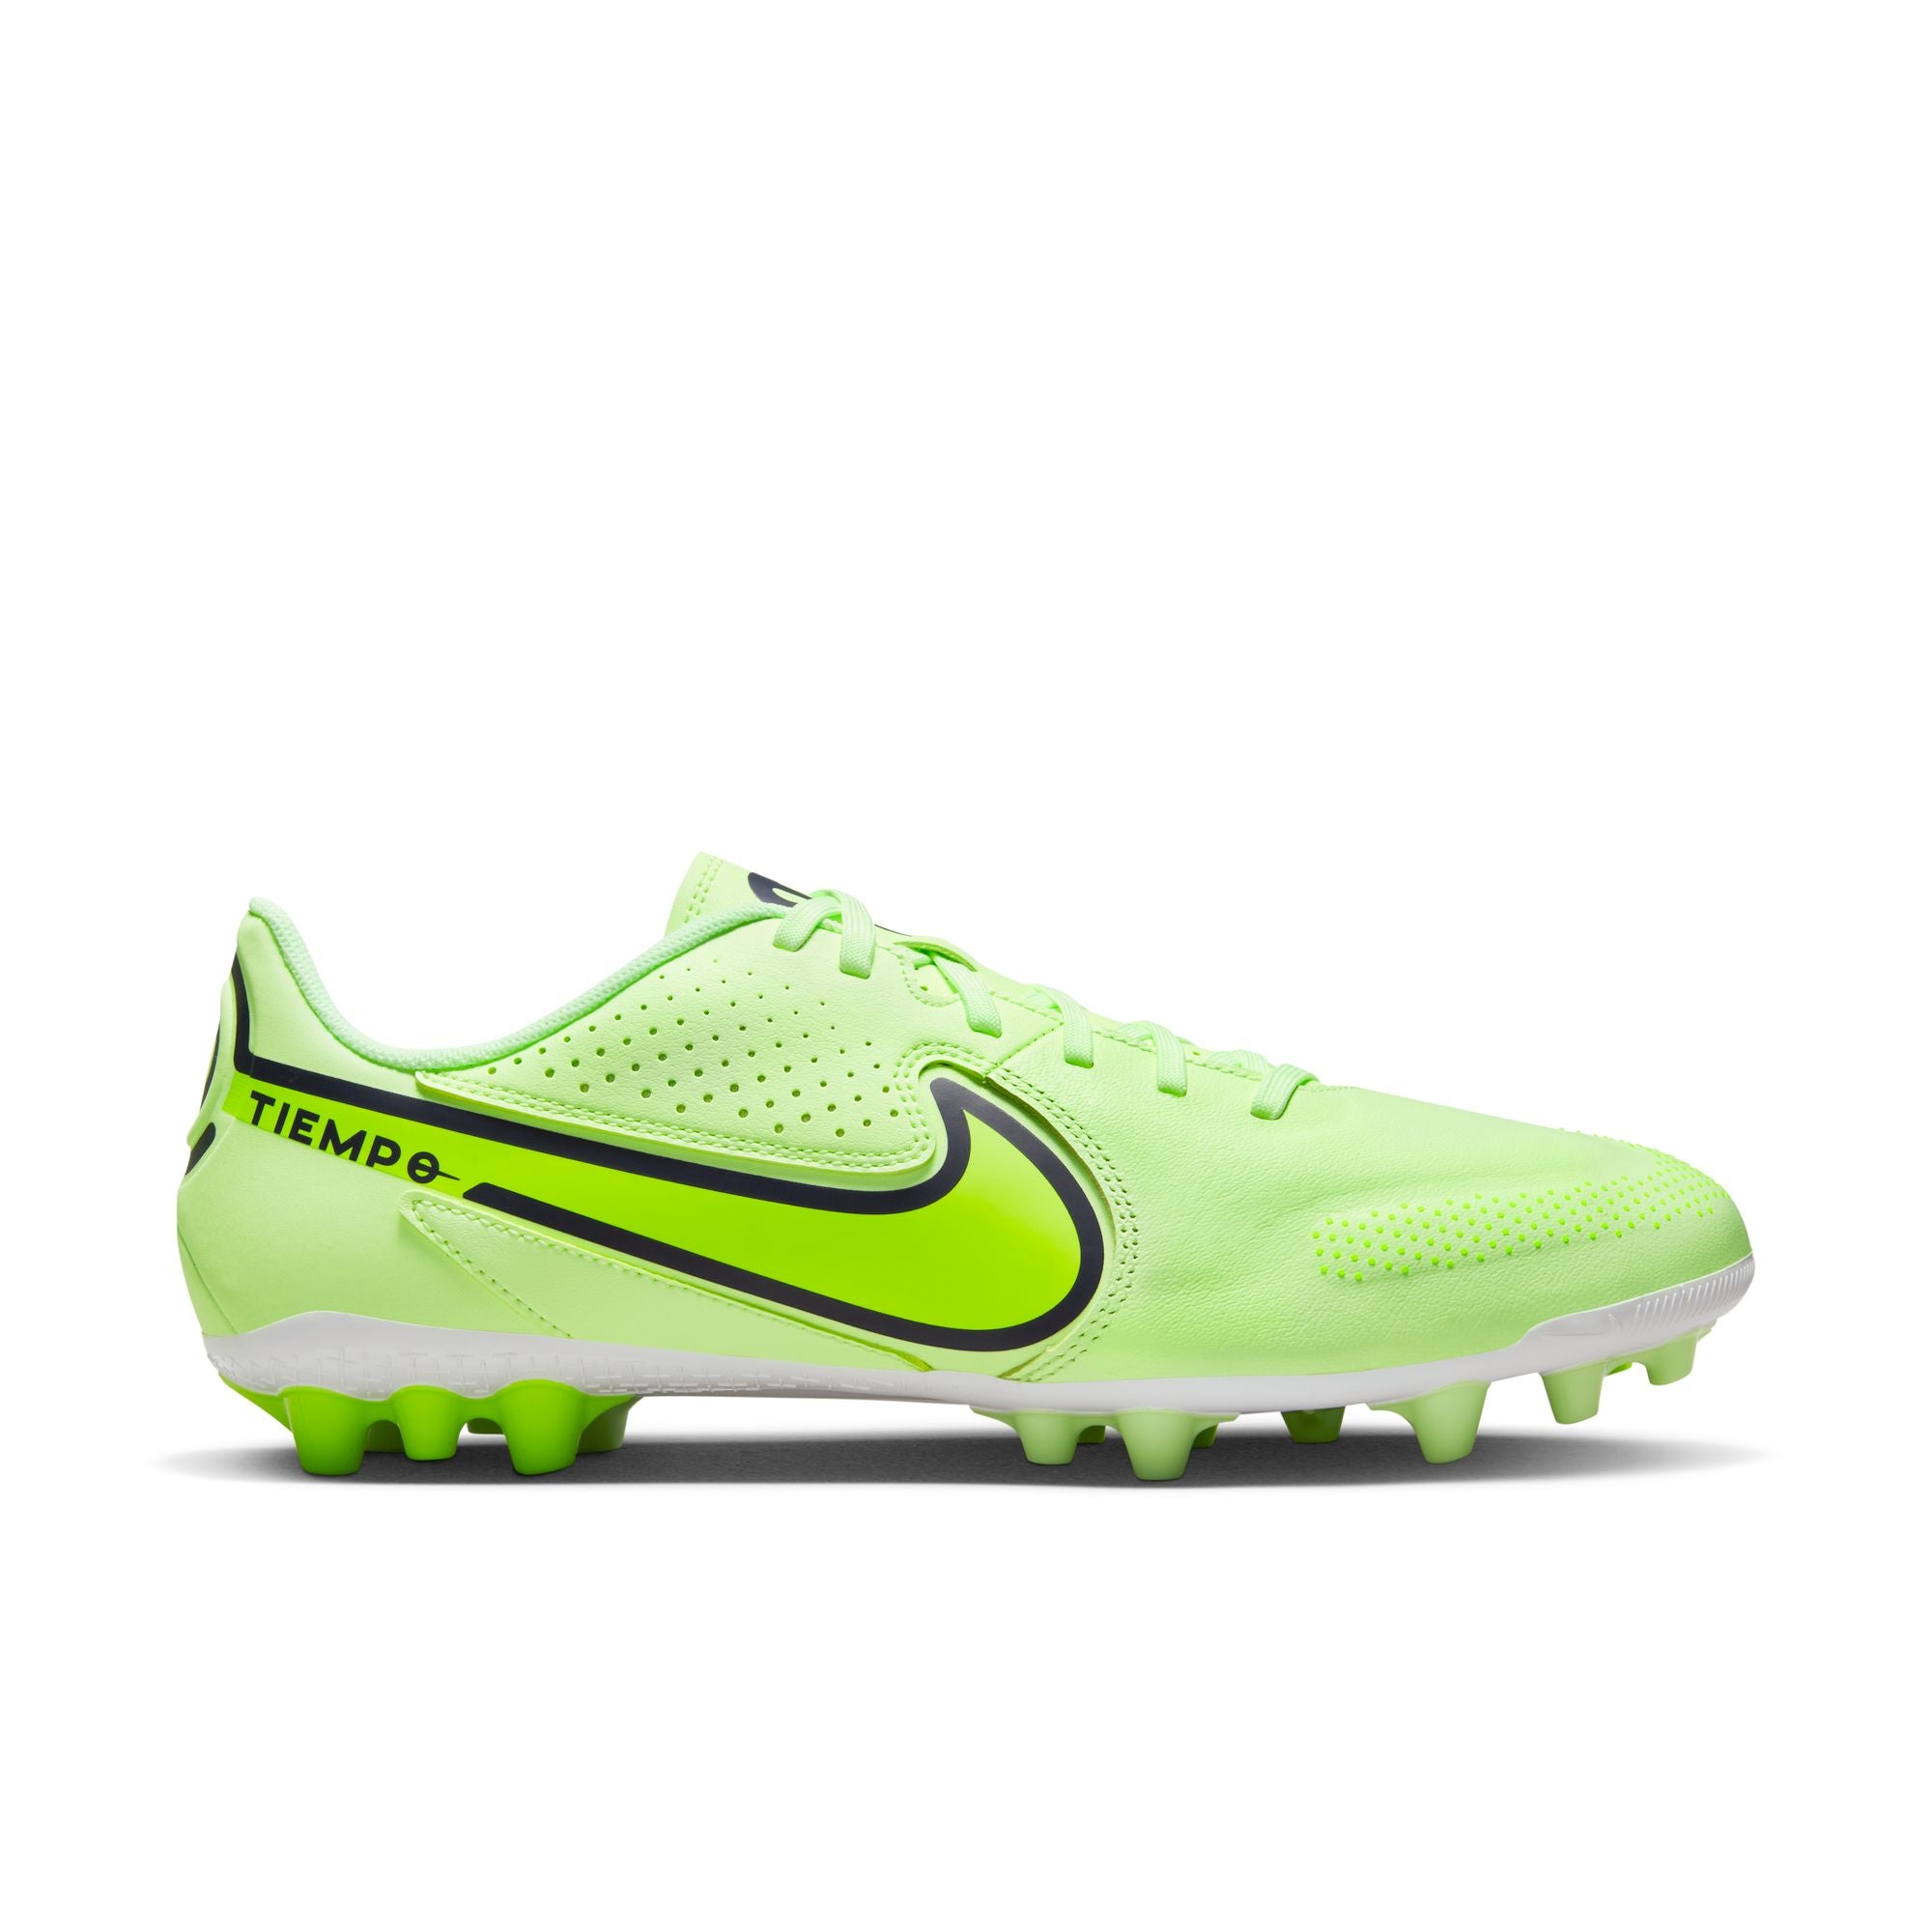 Nike Tiempo 9 AG Artificial-Grass Soccer Cleat